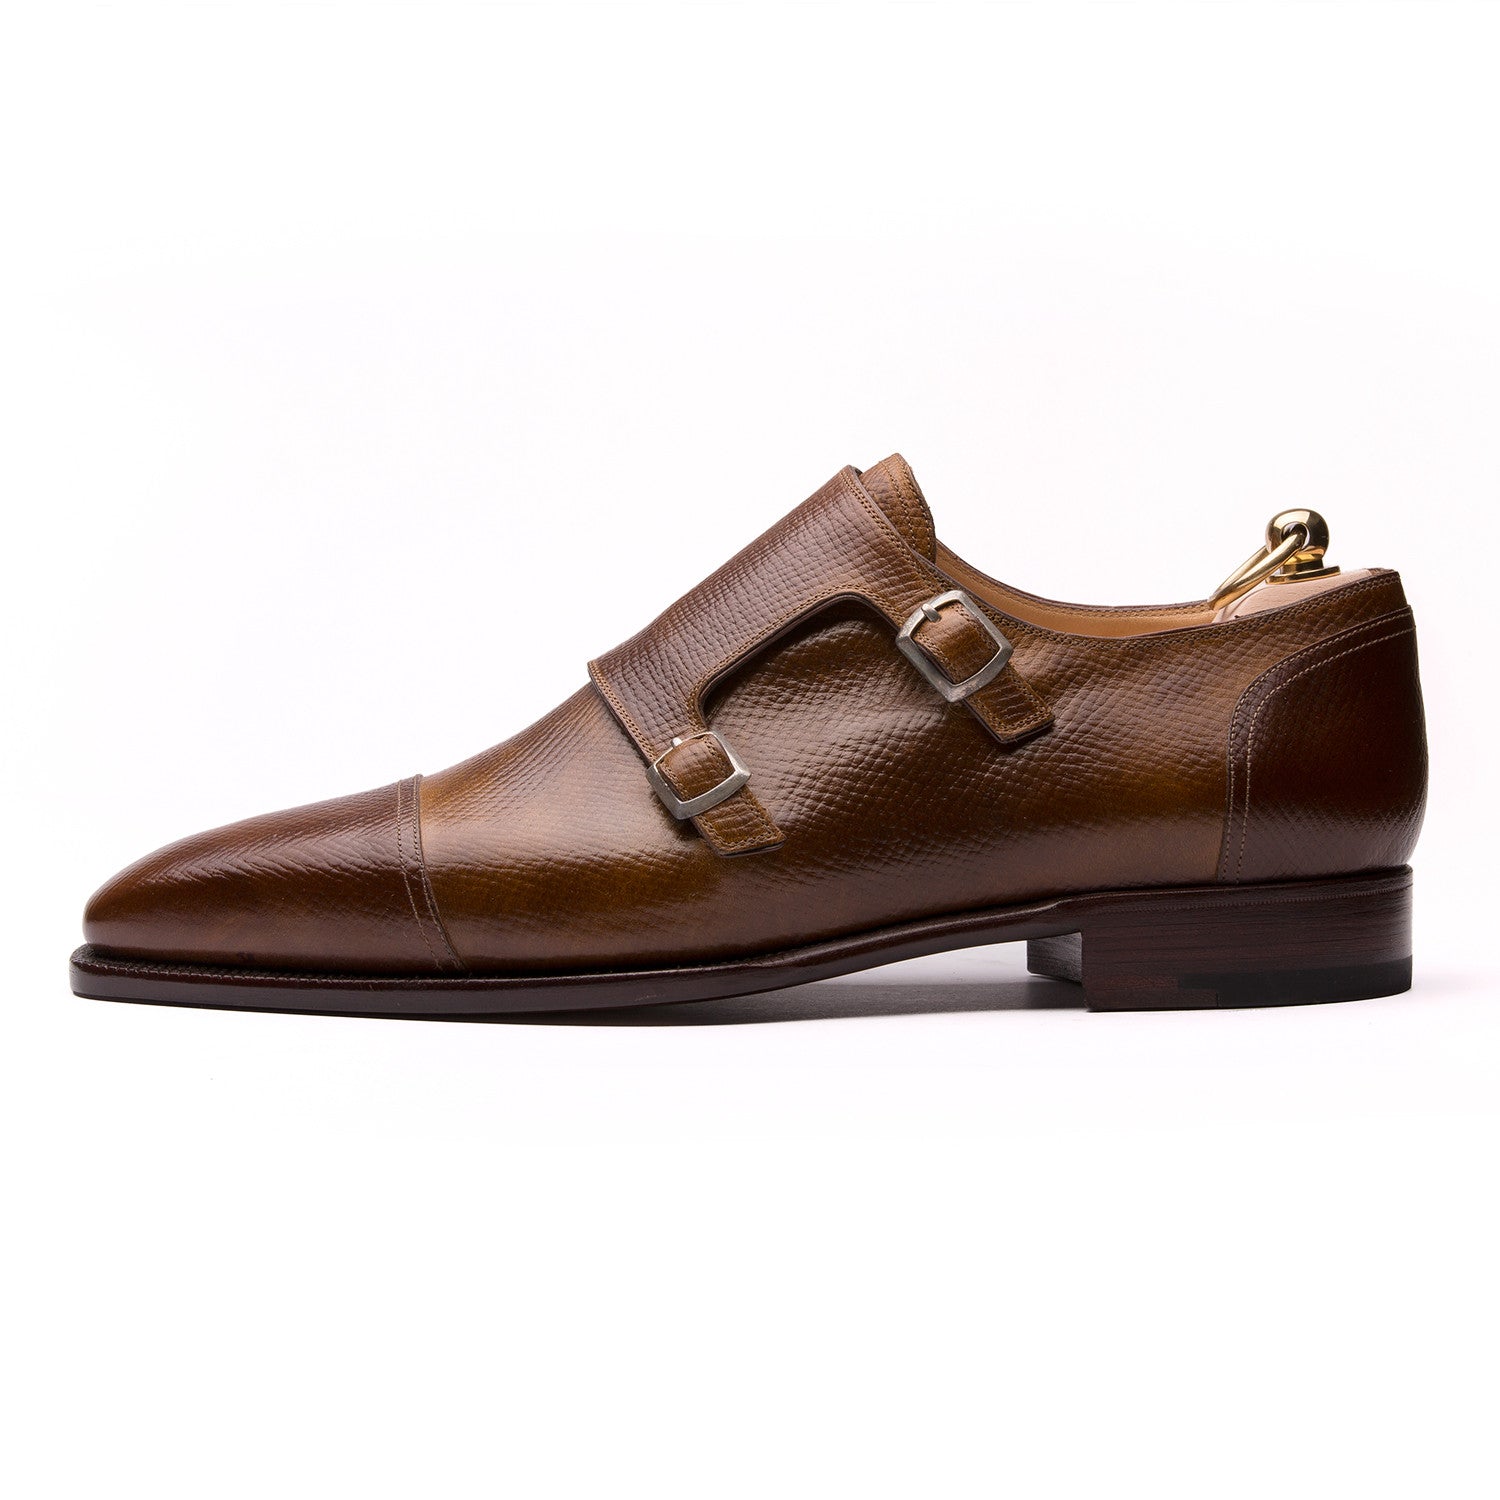 Stefano Bemer Style 2310 - Cinnamon Horsefront - Side View